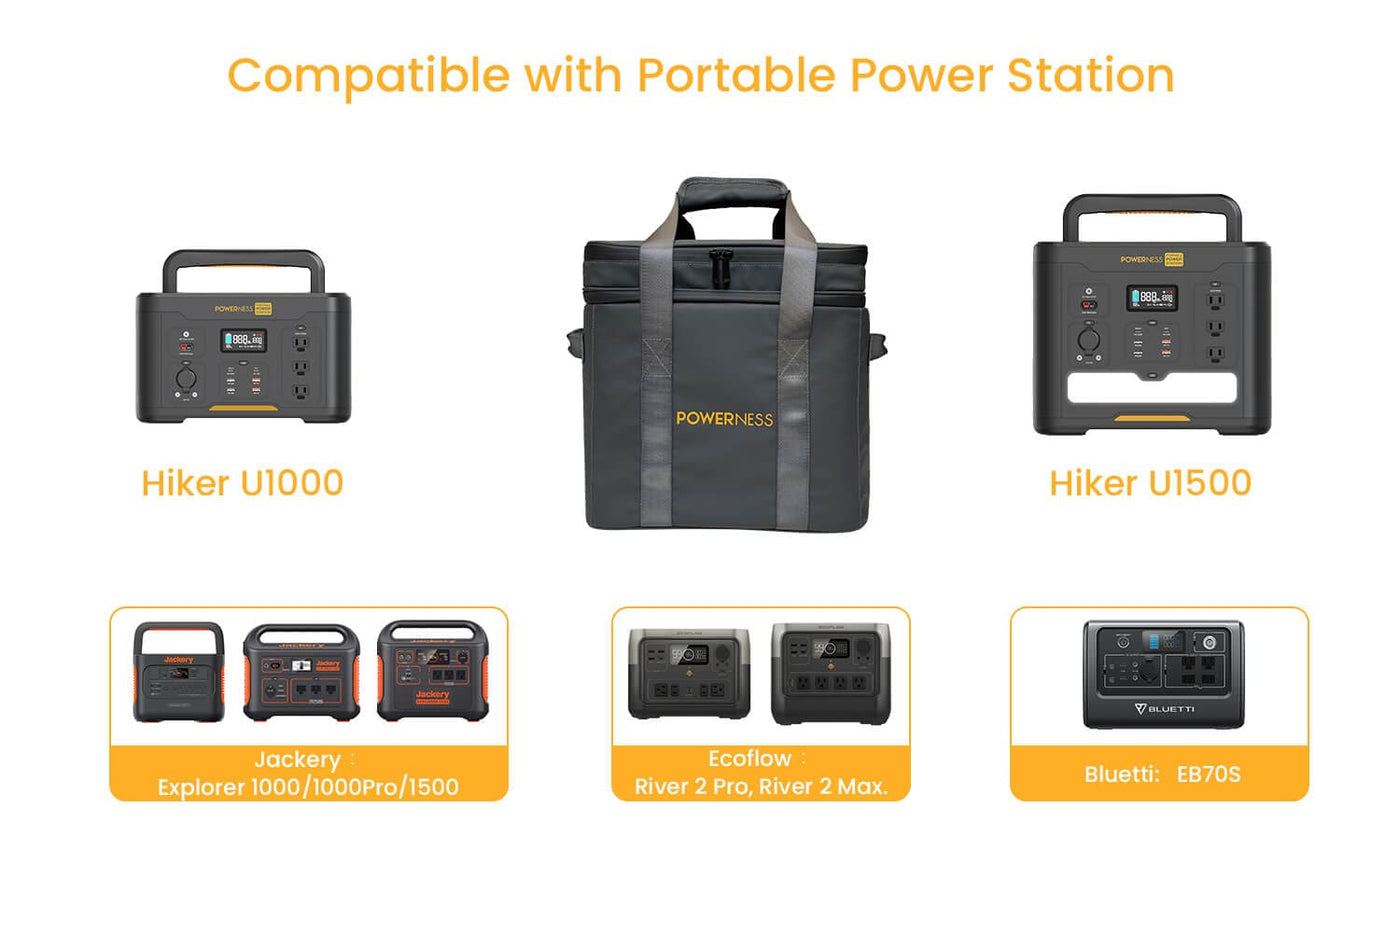 Powerness Carrying Case (For Hiker U1000/U1500)